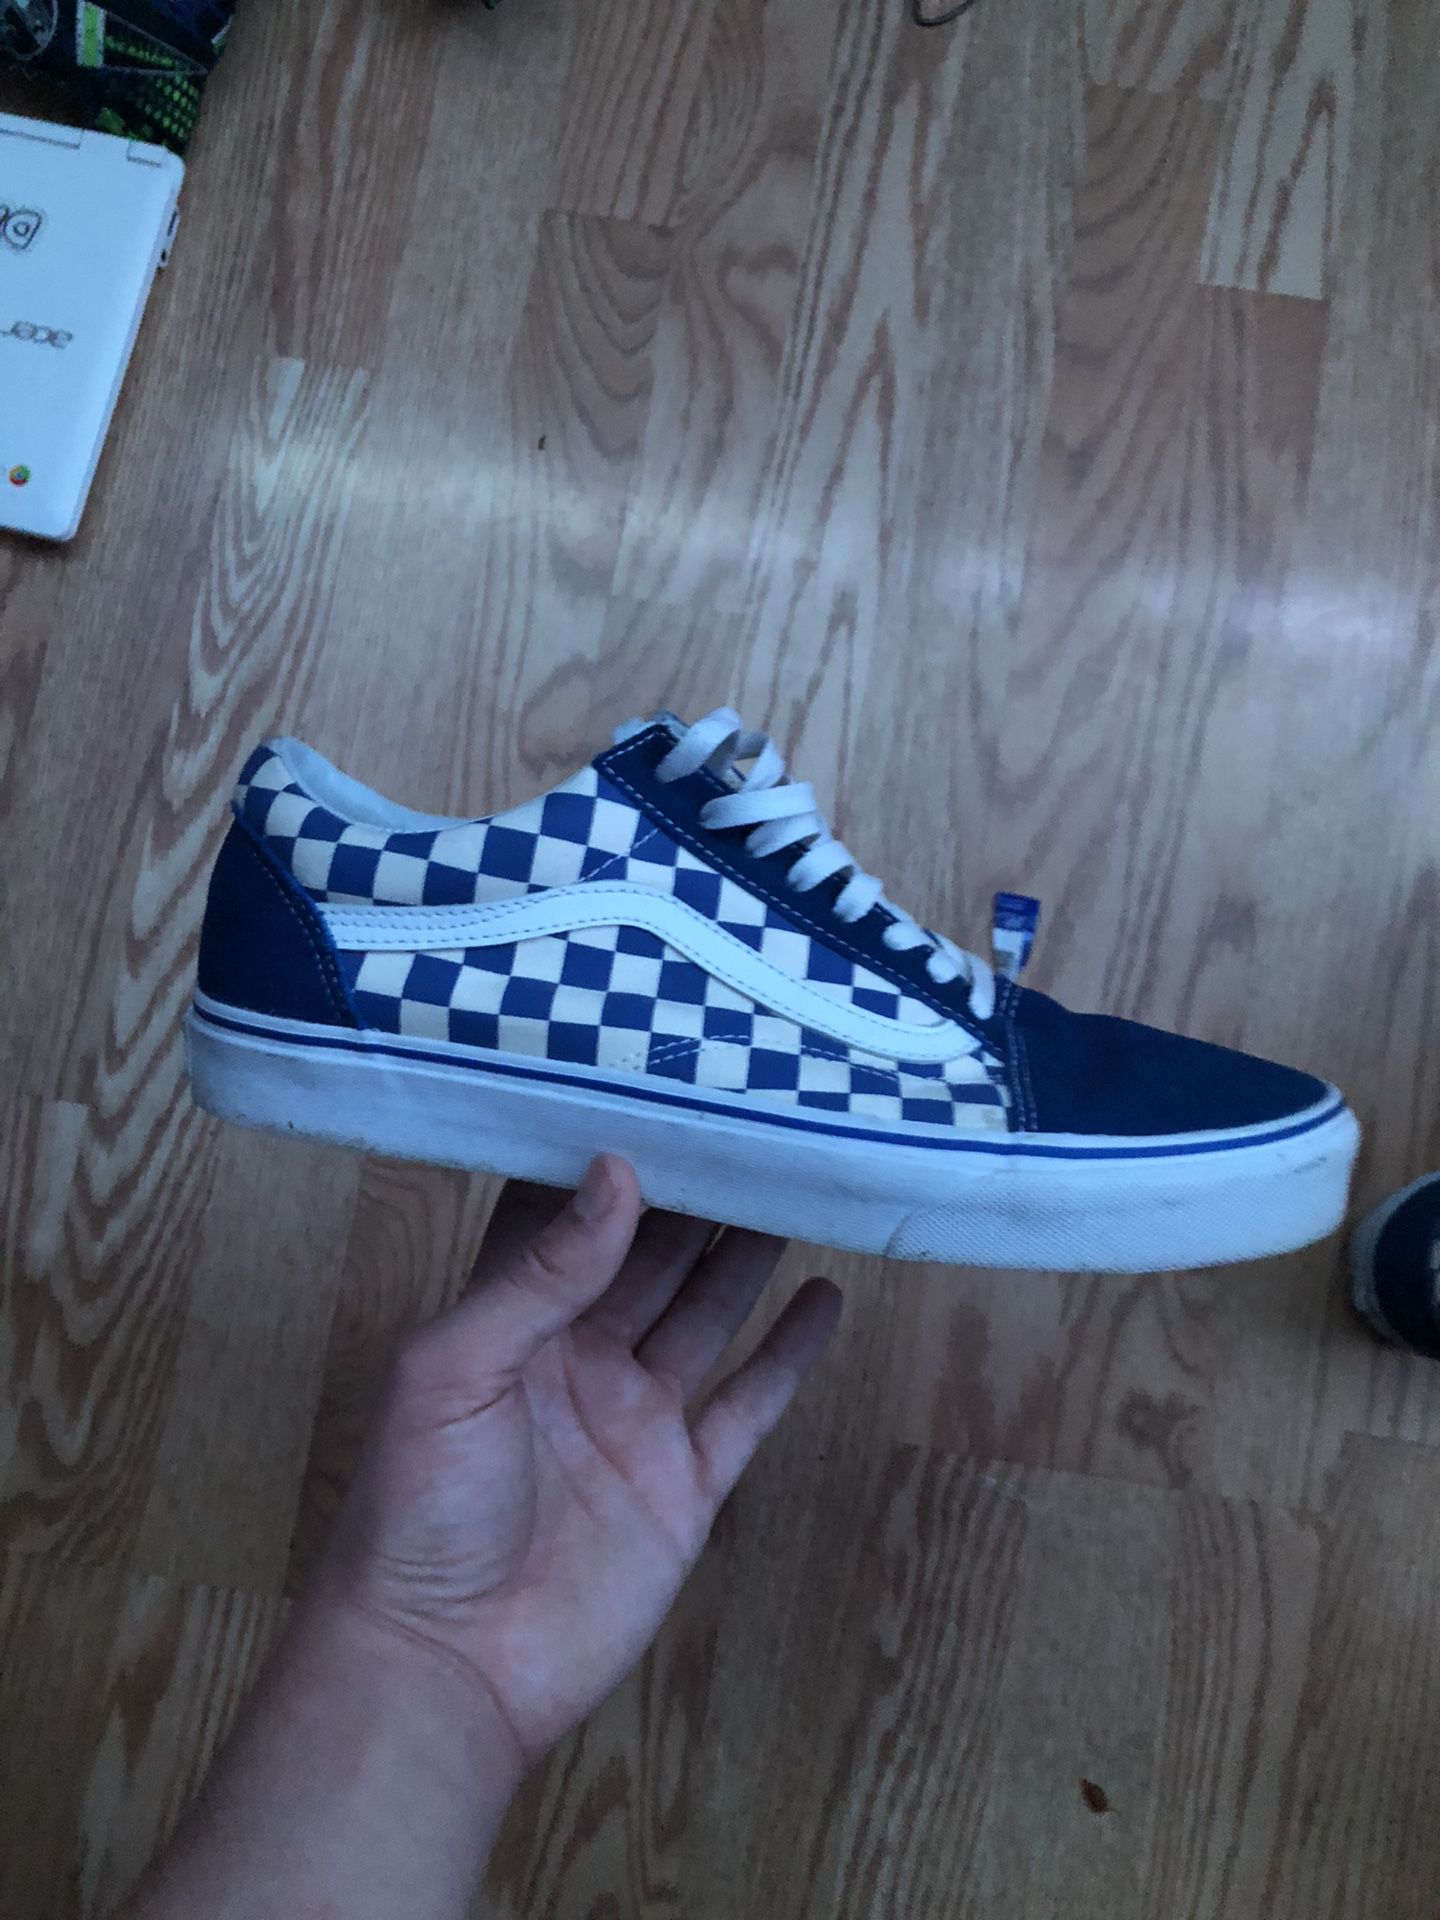 Men’s Limited addition blue and white Checkered vans size 11